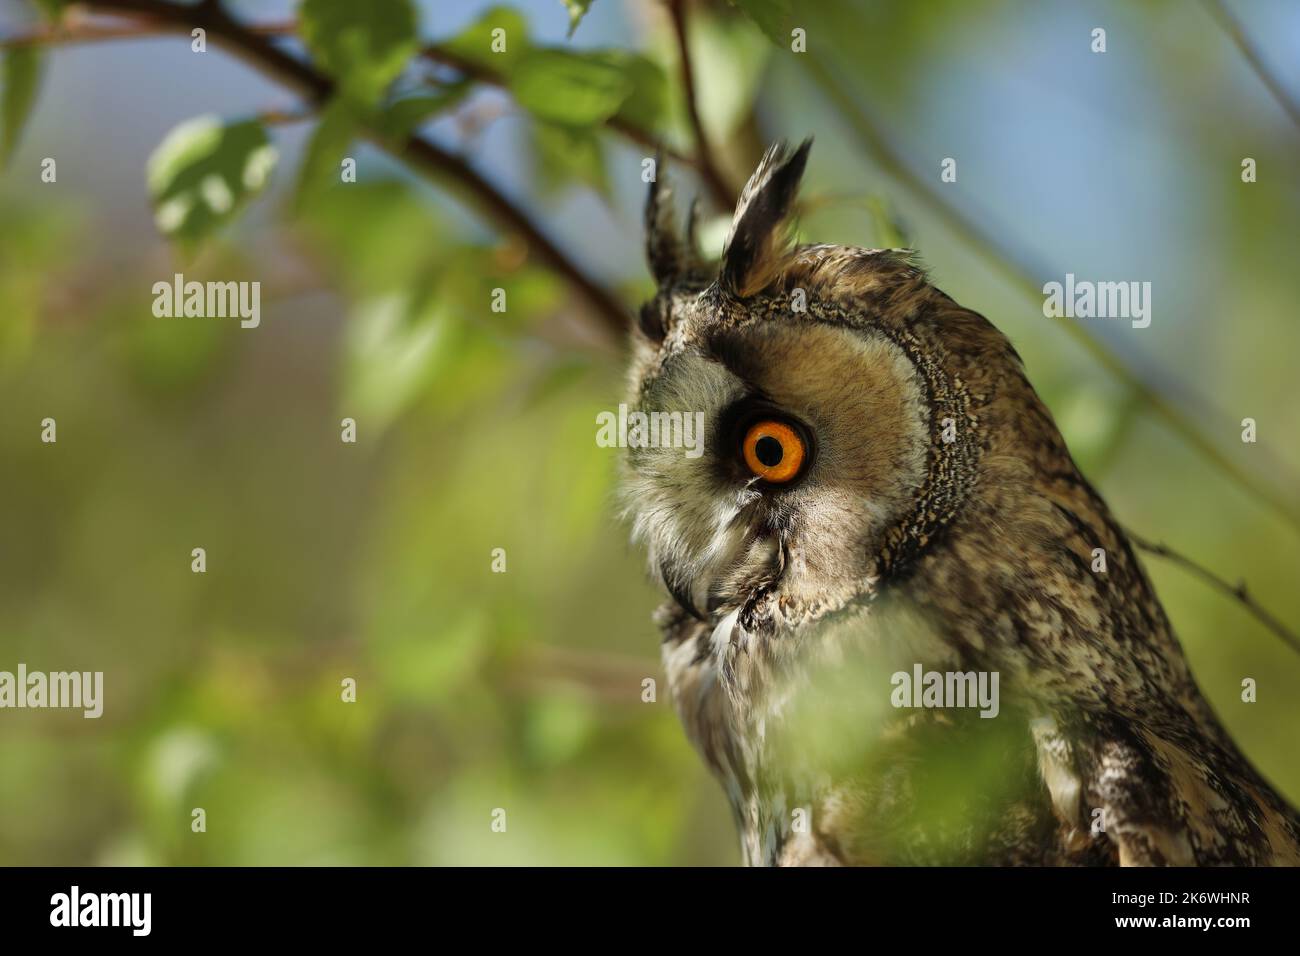 The long-eared owl - Asio otus, owl looking through branches of birch tree Stock Photo